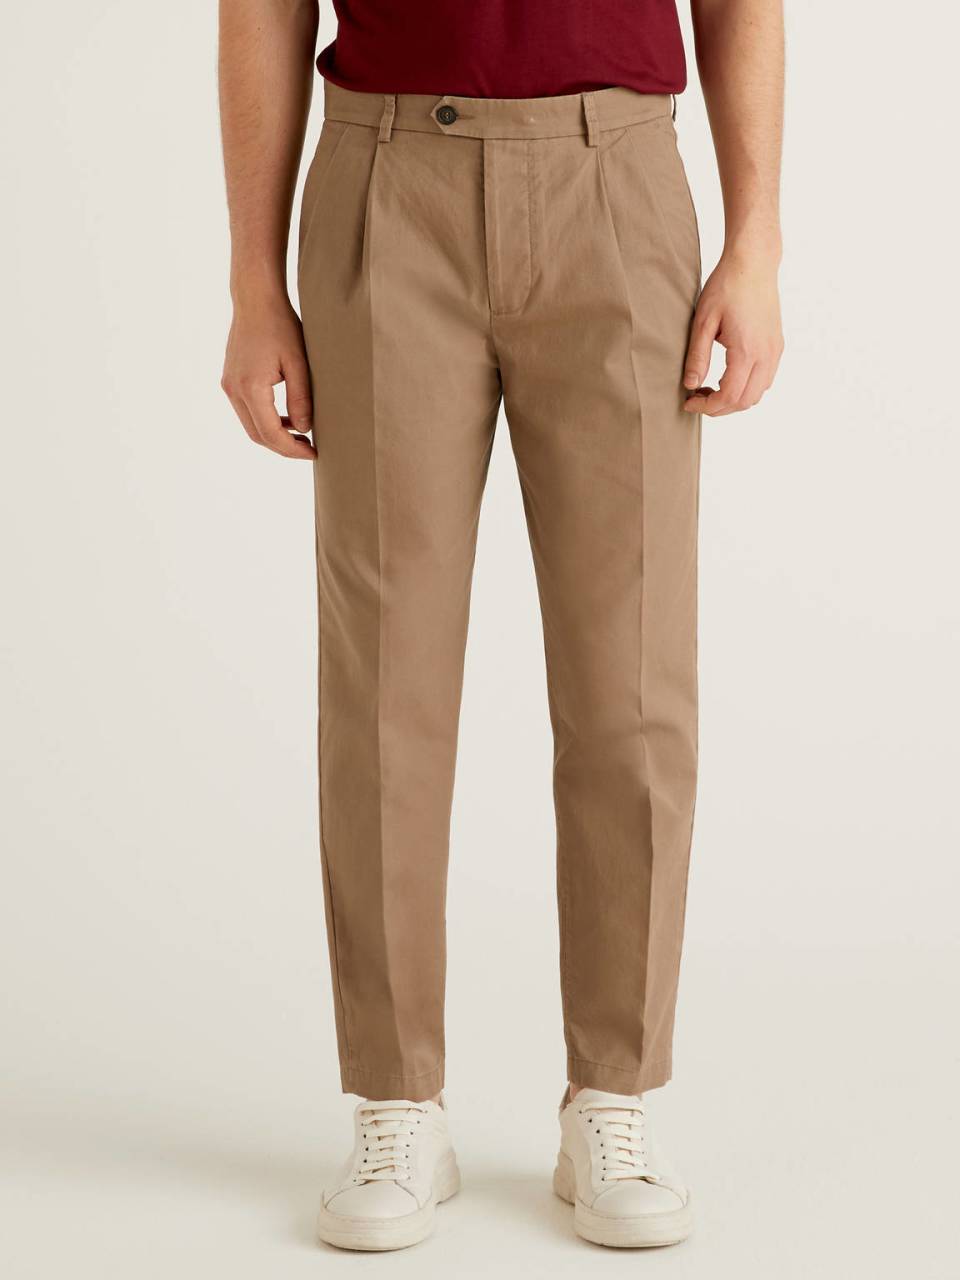 Benetton Carrot fit trousers in 100% cotton. 1